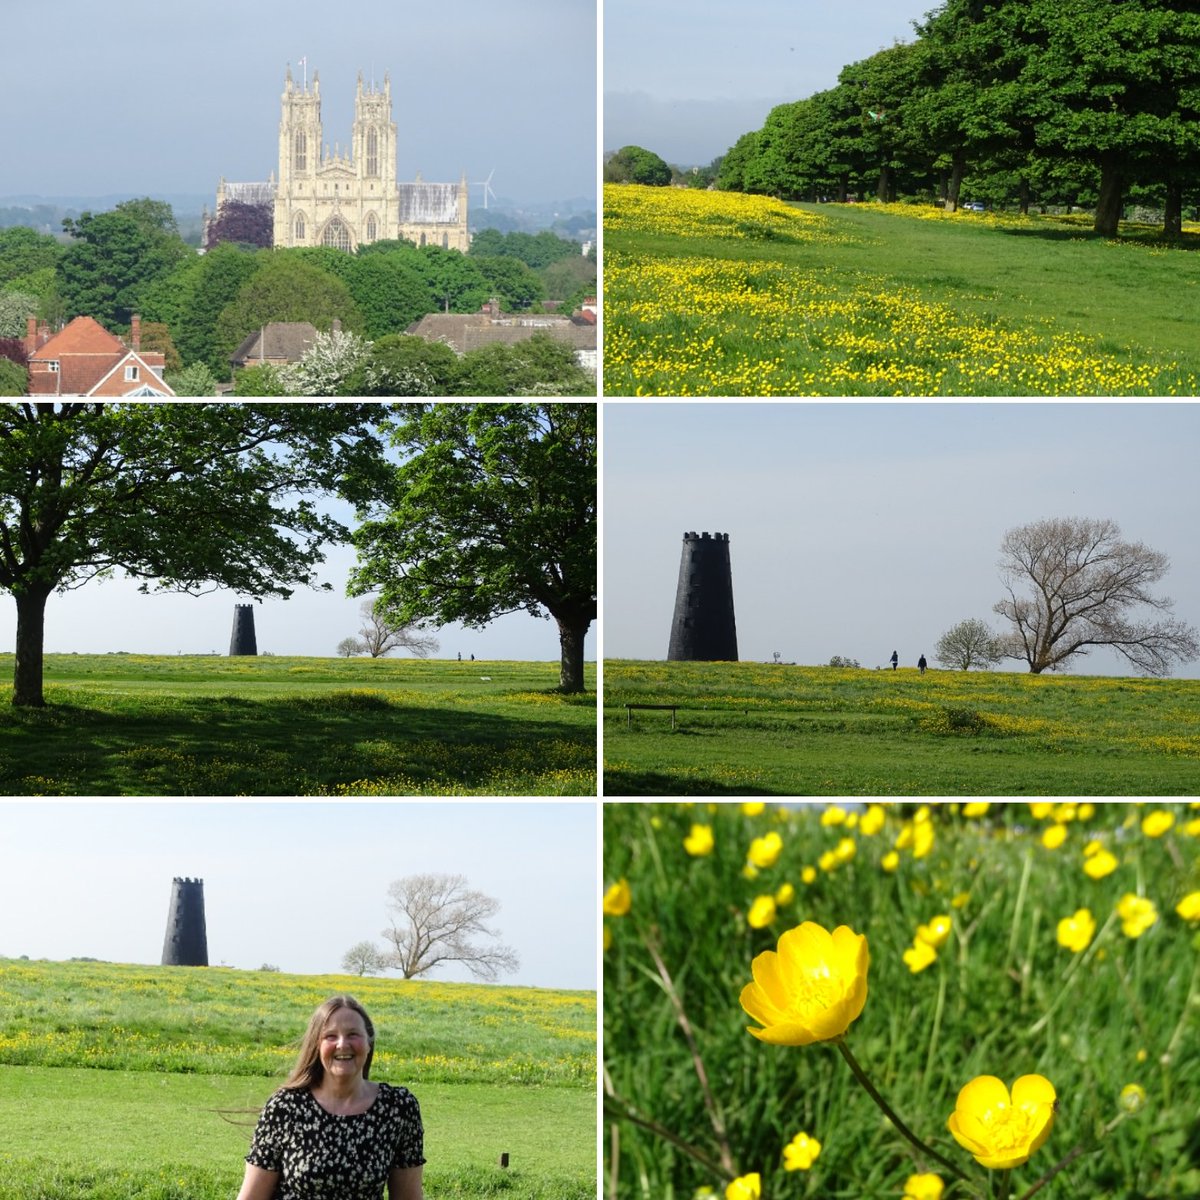 A glorious early evening on Beverley Westwood #beverley #westwood #beverleywestwood #beverleyminster #blackmill #buttercups #meadow #pasture #commonland #spring #may #sunshine